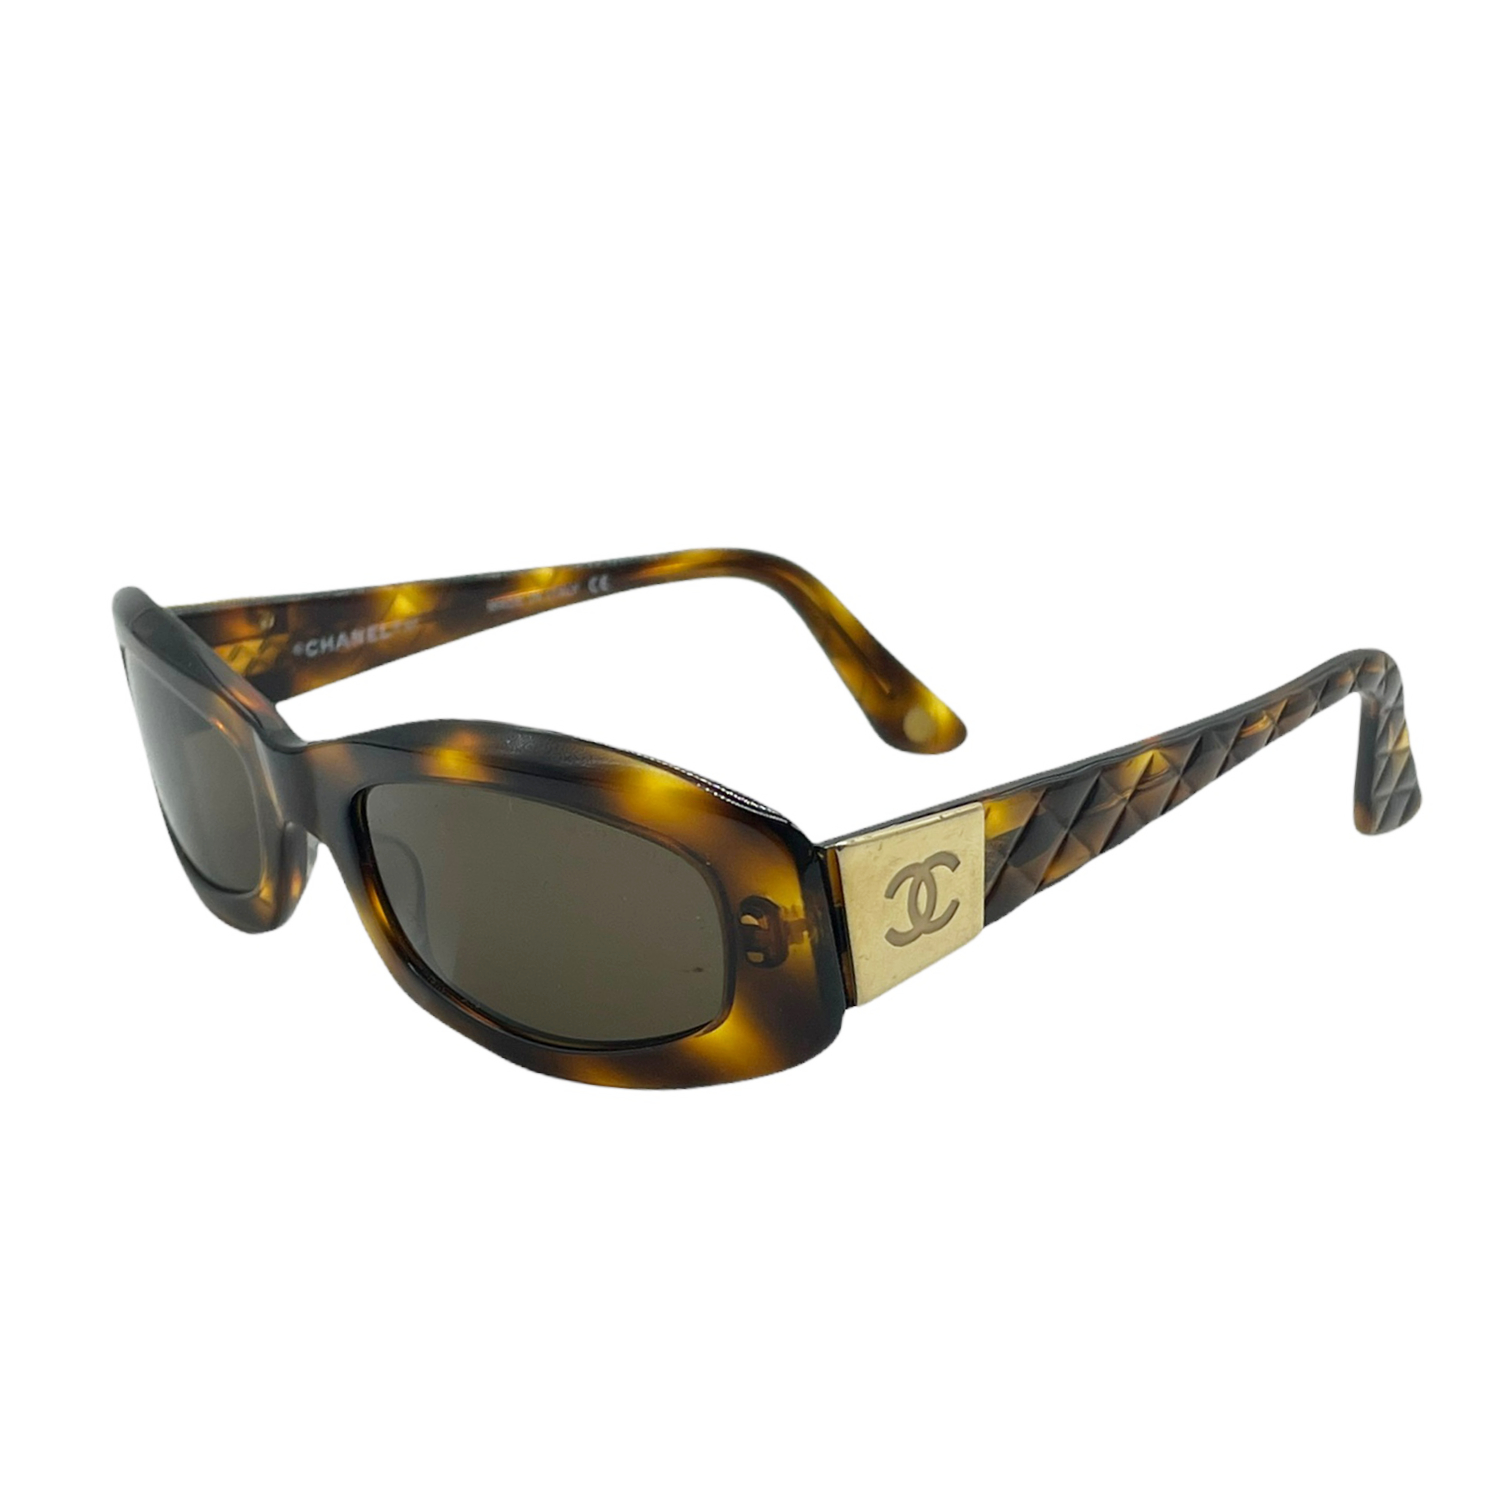 Chanel Chunky Sunglasses in Tortoiseshell and Gold